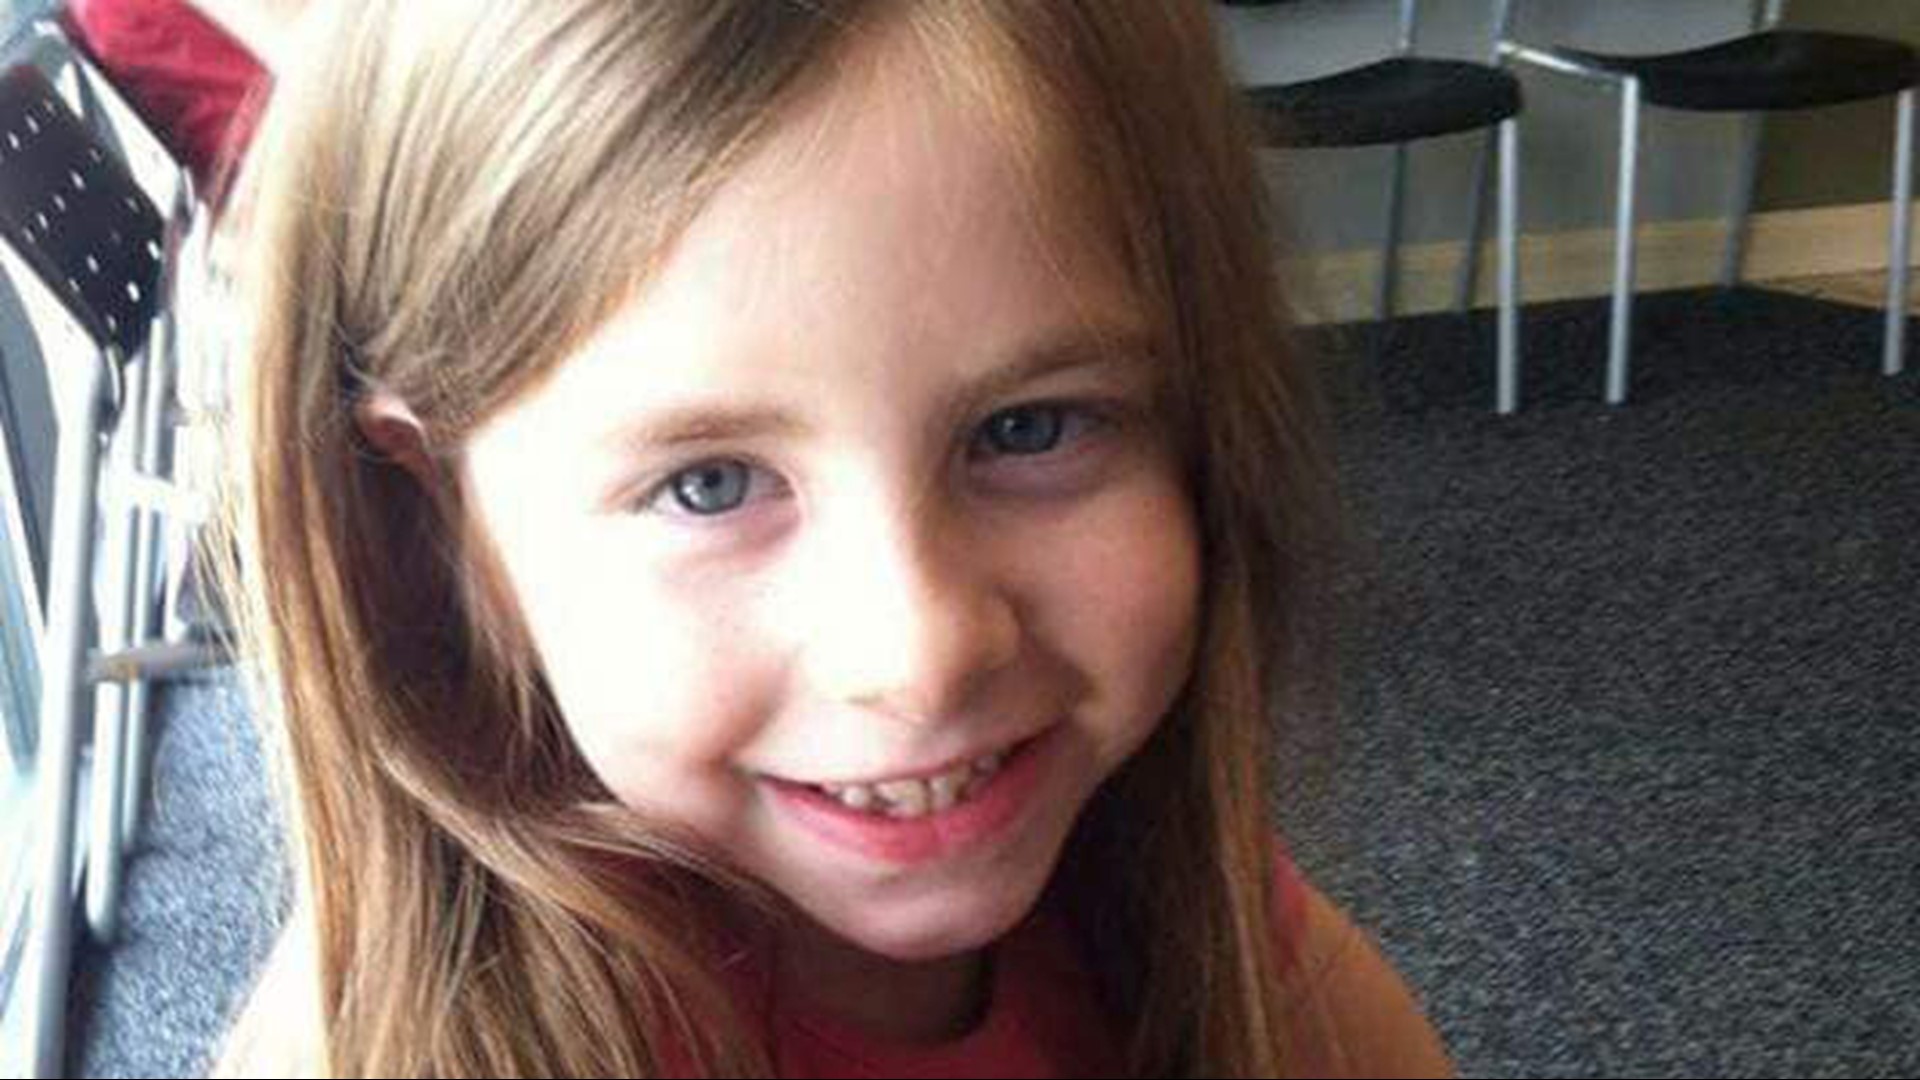 It's been about 18 months since Lily Kate Powell was killed in a crash.